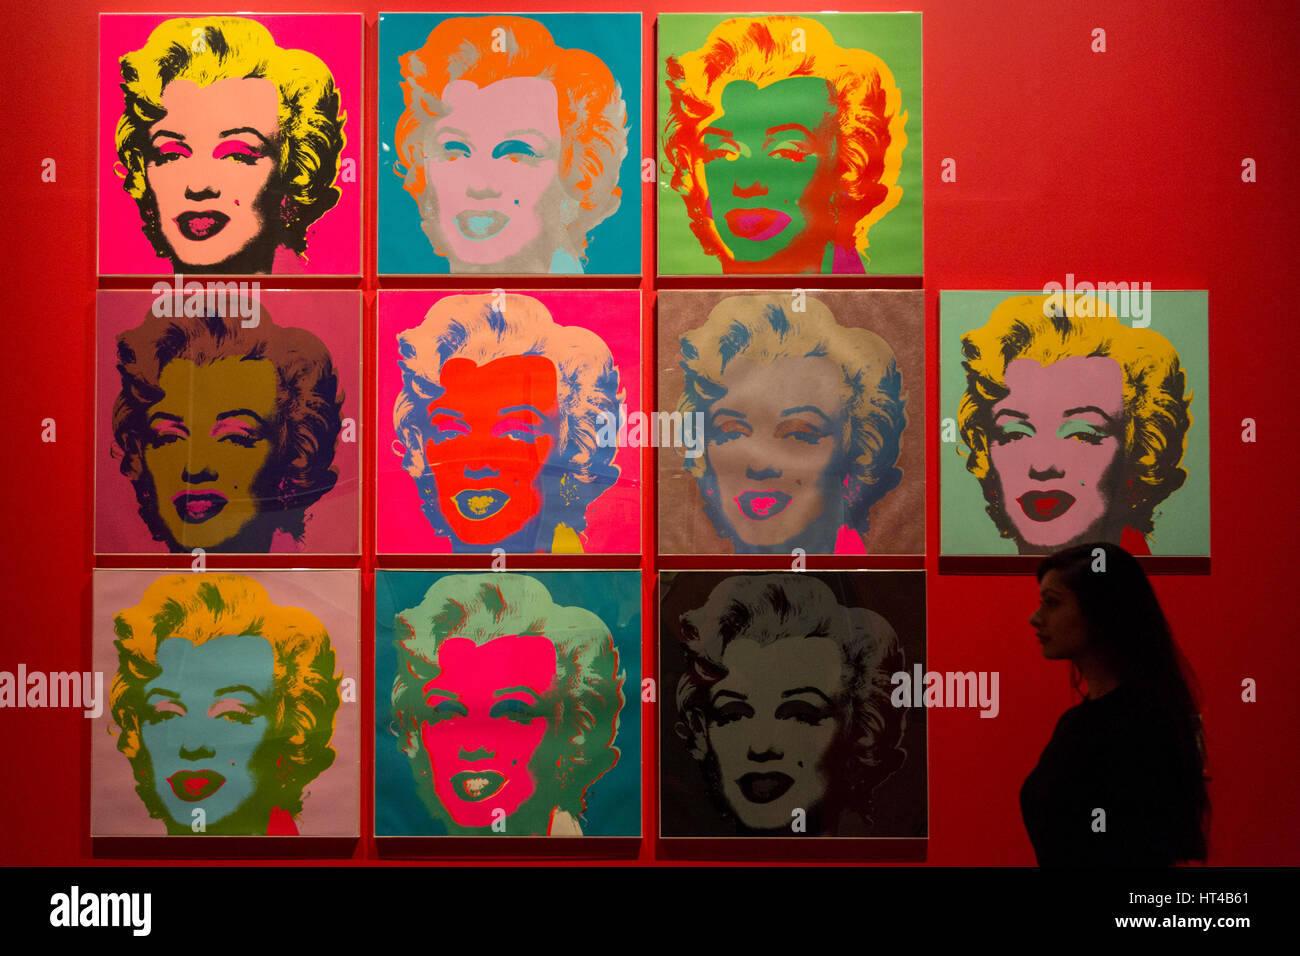 London, UK. 6 March 2017. Pictured: Marilyn, 1967, 10 colour screenprints by Andy Warhol. The exhibition 'The American Dream: pop to the present' opens at the British Museum on 9 March and runs until 18 June 2017. The American Dream is the UK's first major exhibition to chart modern and contemporary American printmaking and has more than 200 works by 70 artists on display. it is sponsored by Morgan Stanley and supported by the Terra Foundation for American Art. Stock Photo